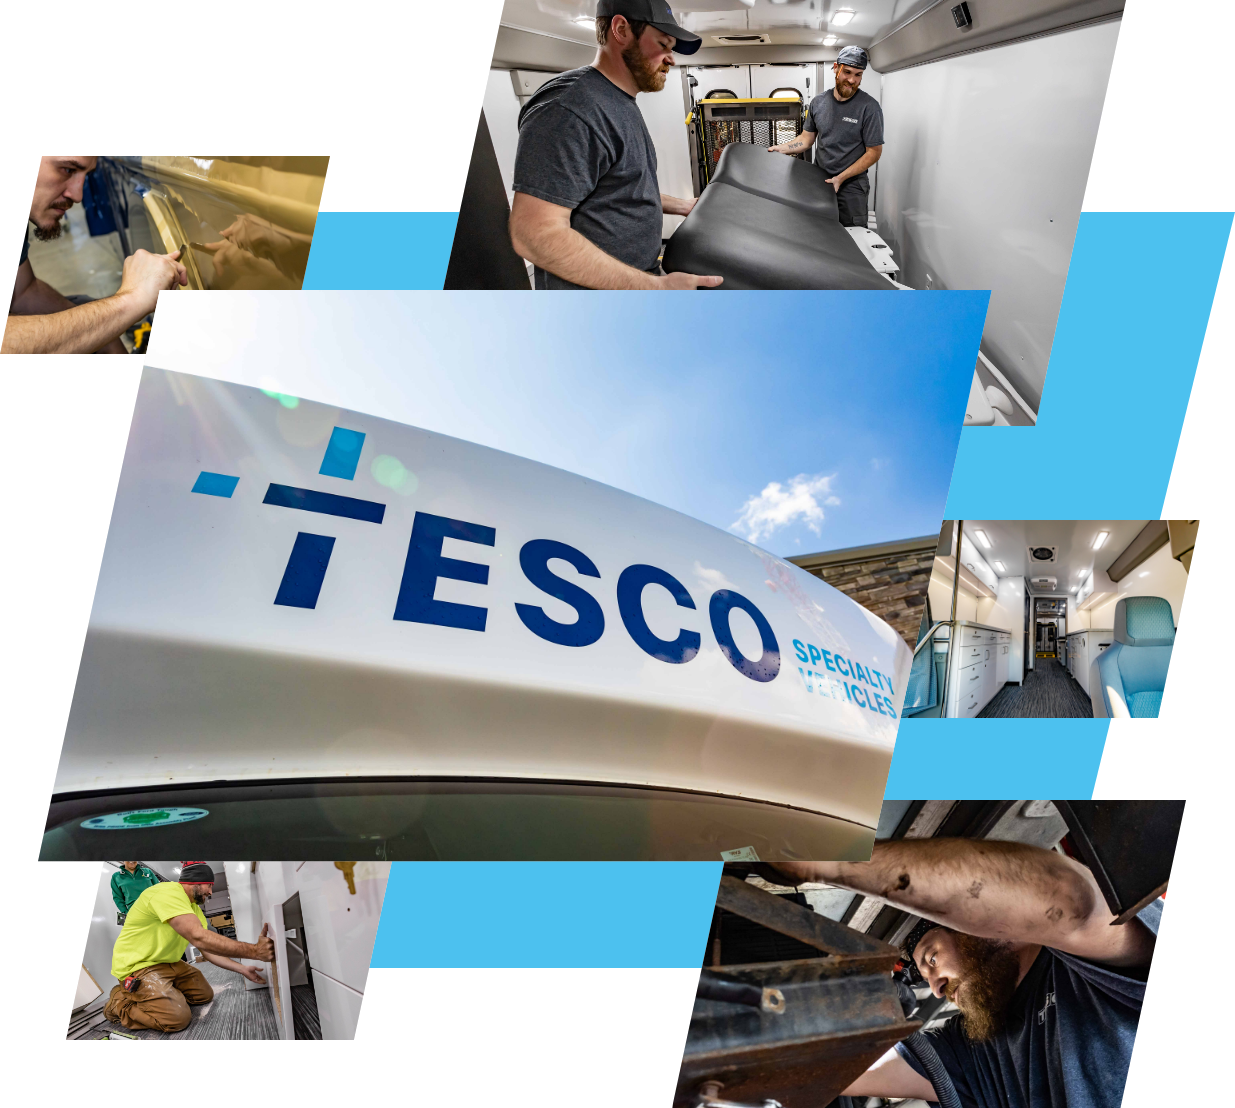 tesco_branded_collage